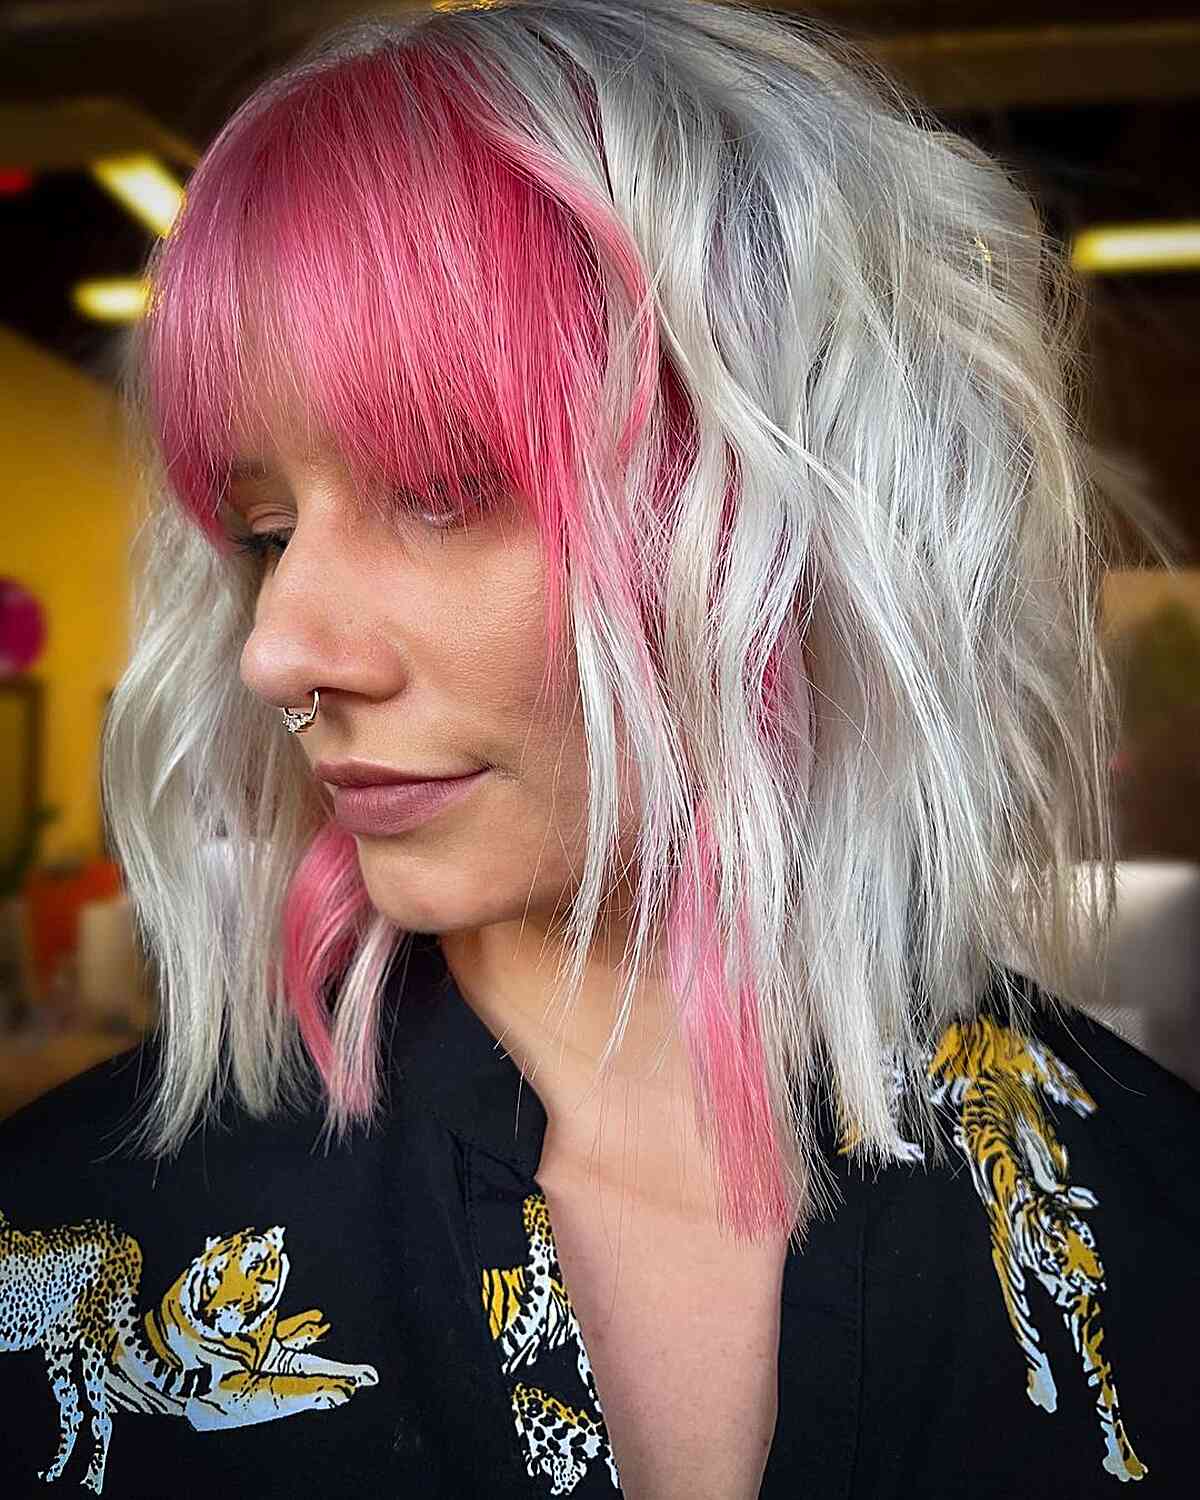 Icy White Blonde with Face-Framing Pink Bangs on women with shoulder-length hair